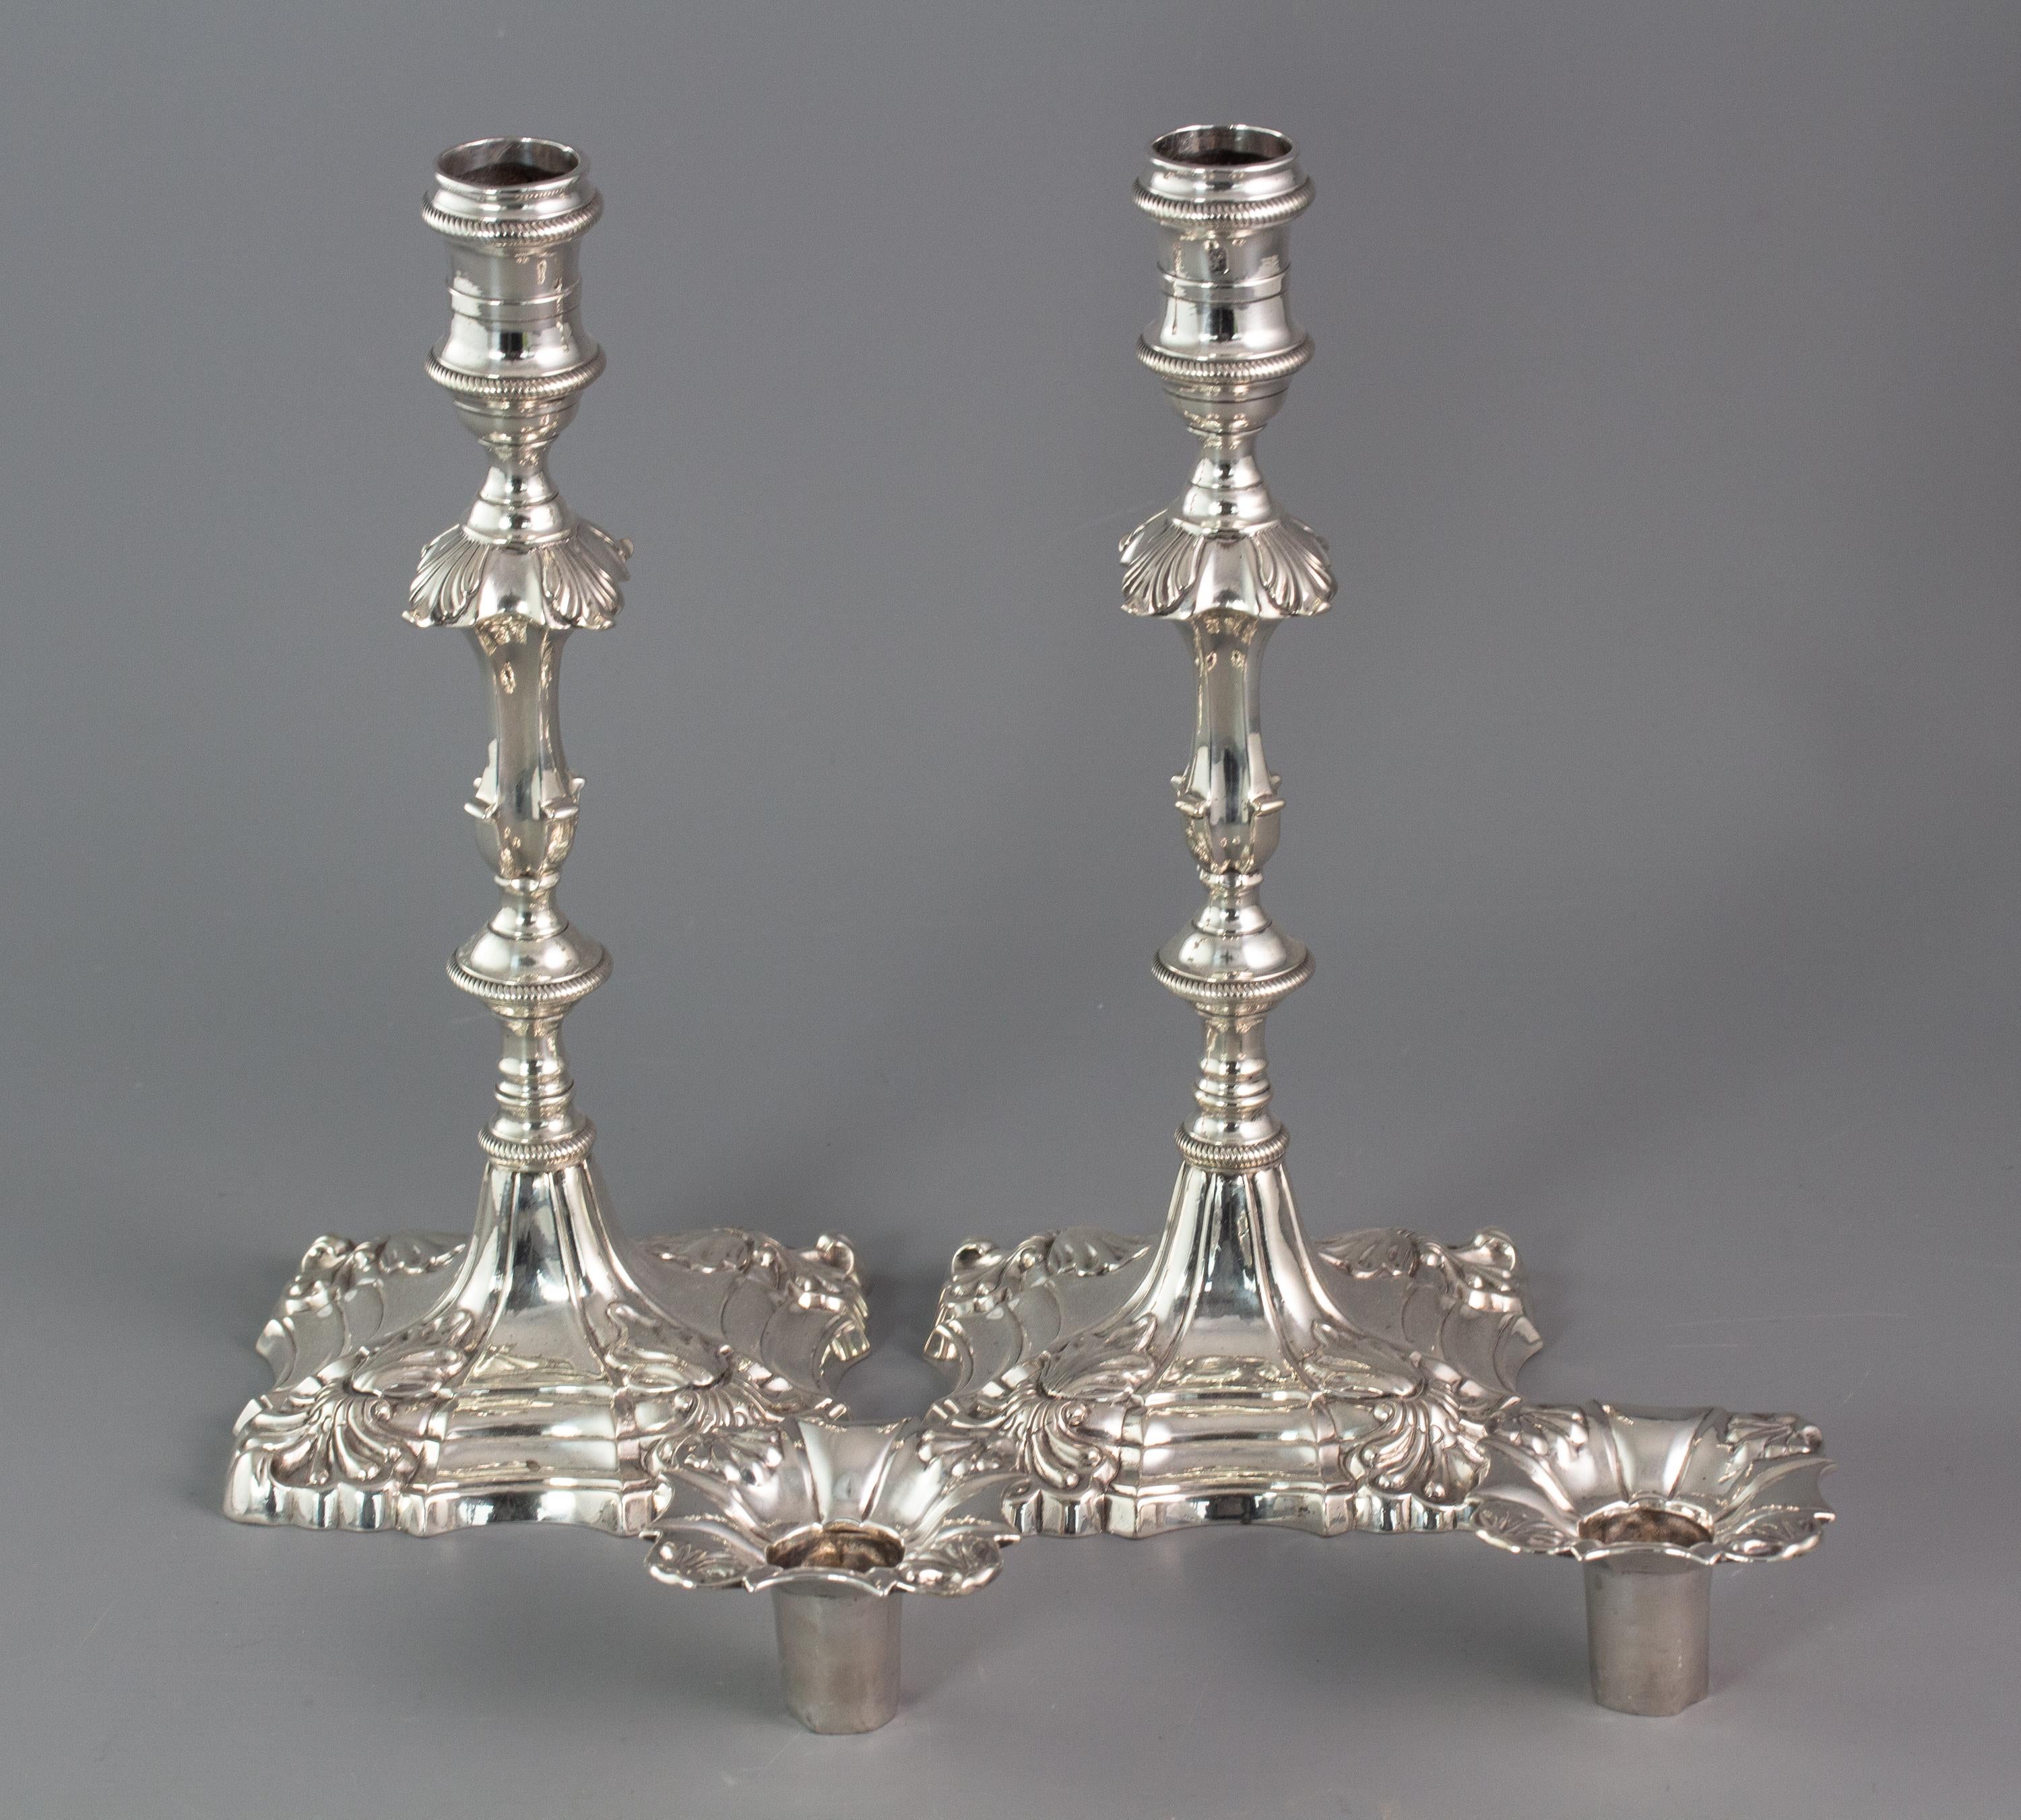 A superb pair of cast George III silver candlesticks by Ebenezer Coker London 1764. With square bases shaped and stepped with flame and shell form corners. The fluted columns rising above a rope decorated circular knop to a square knop with matching